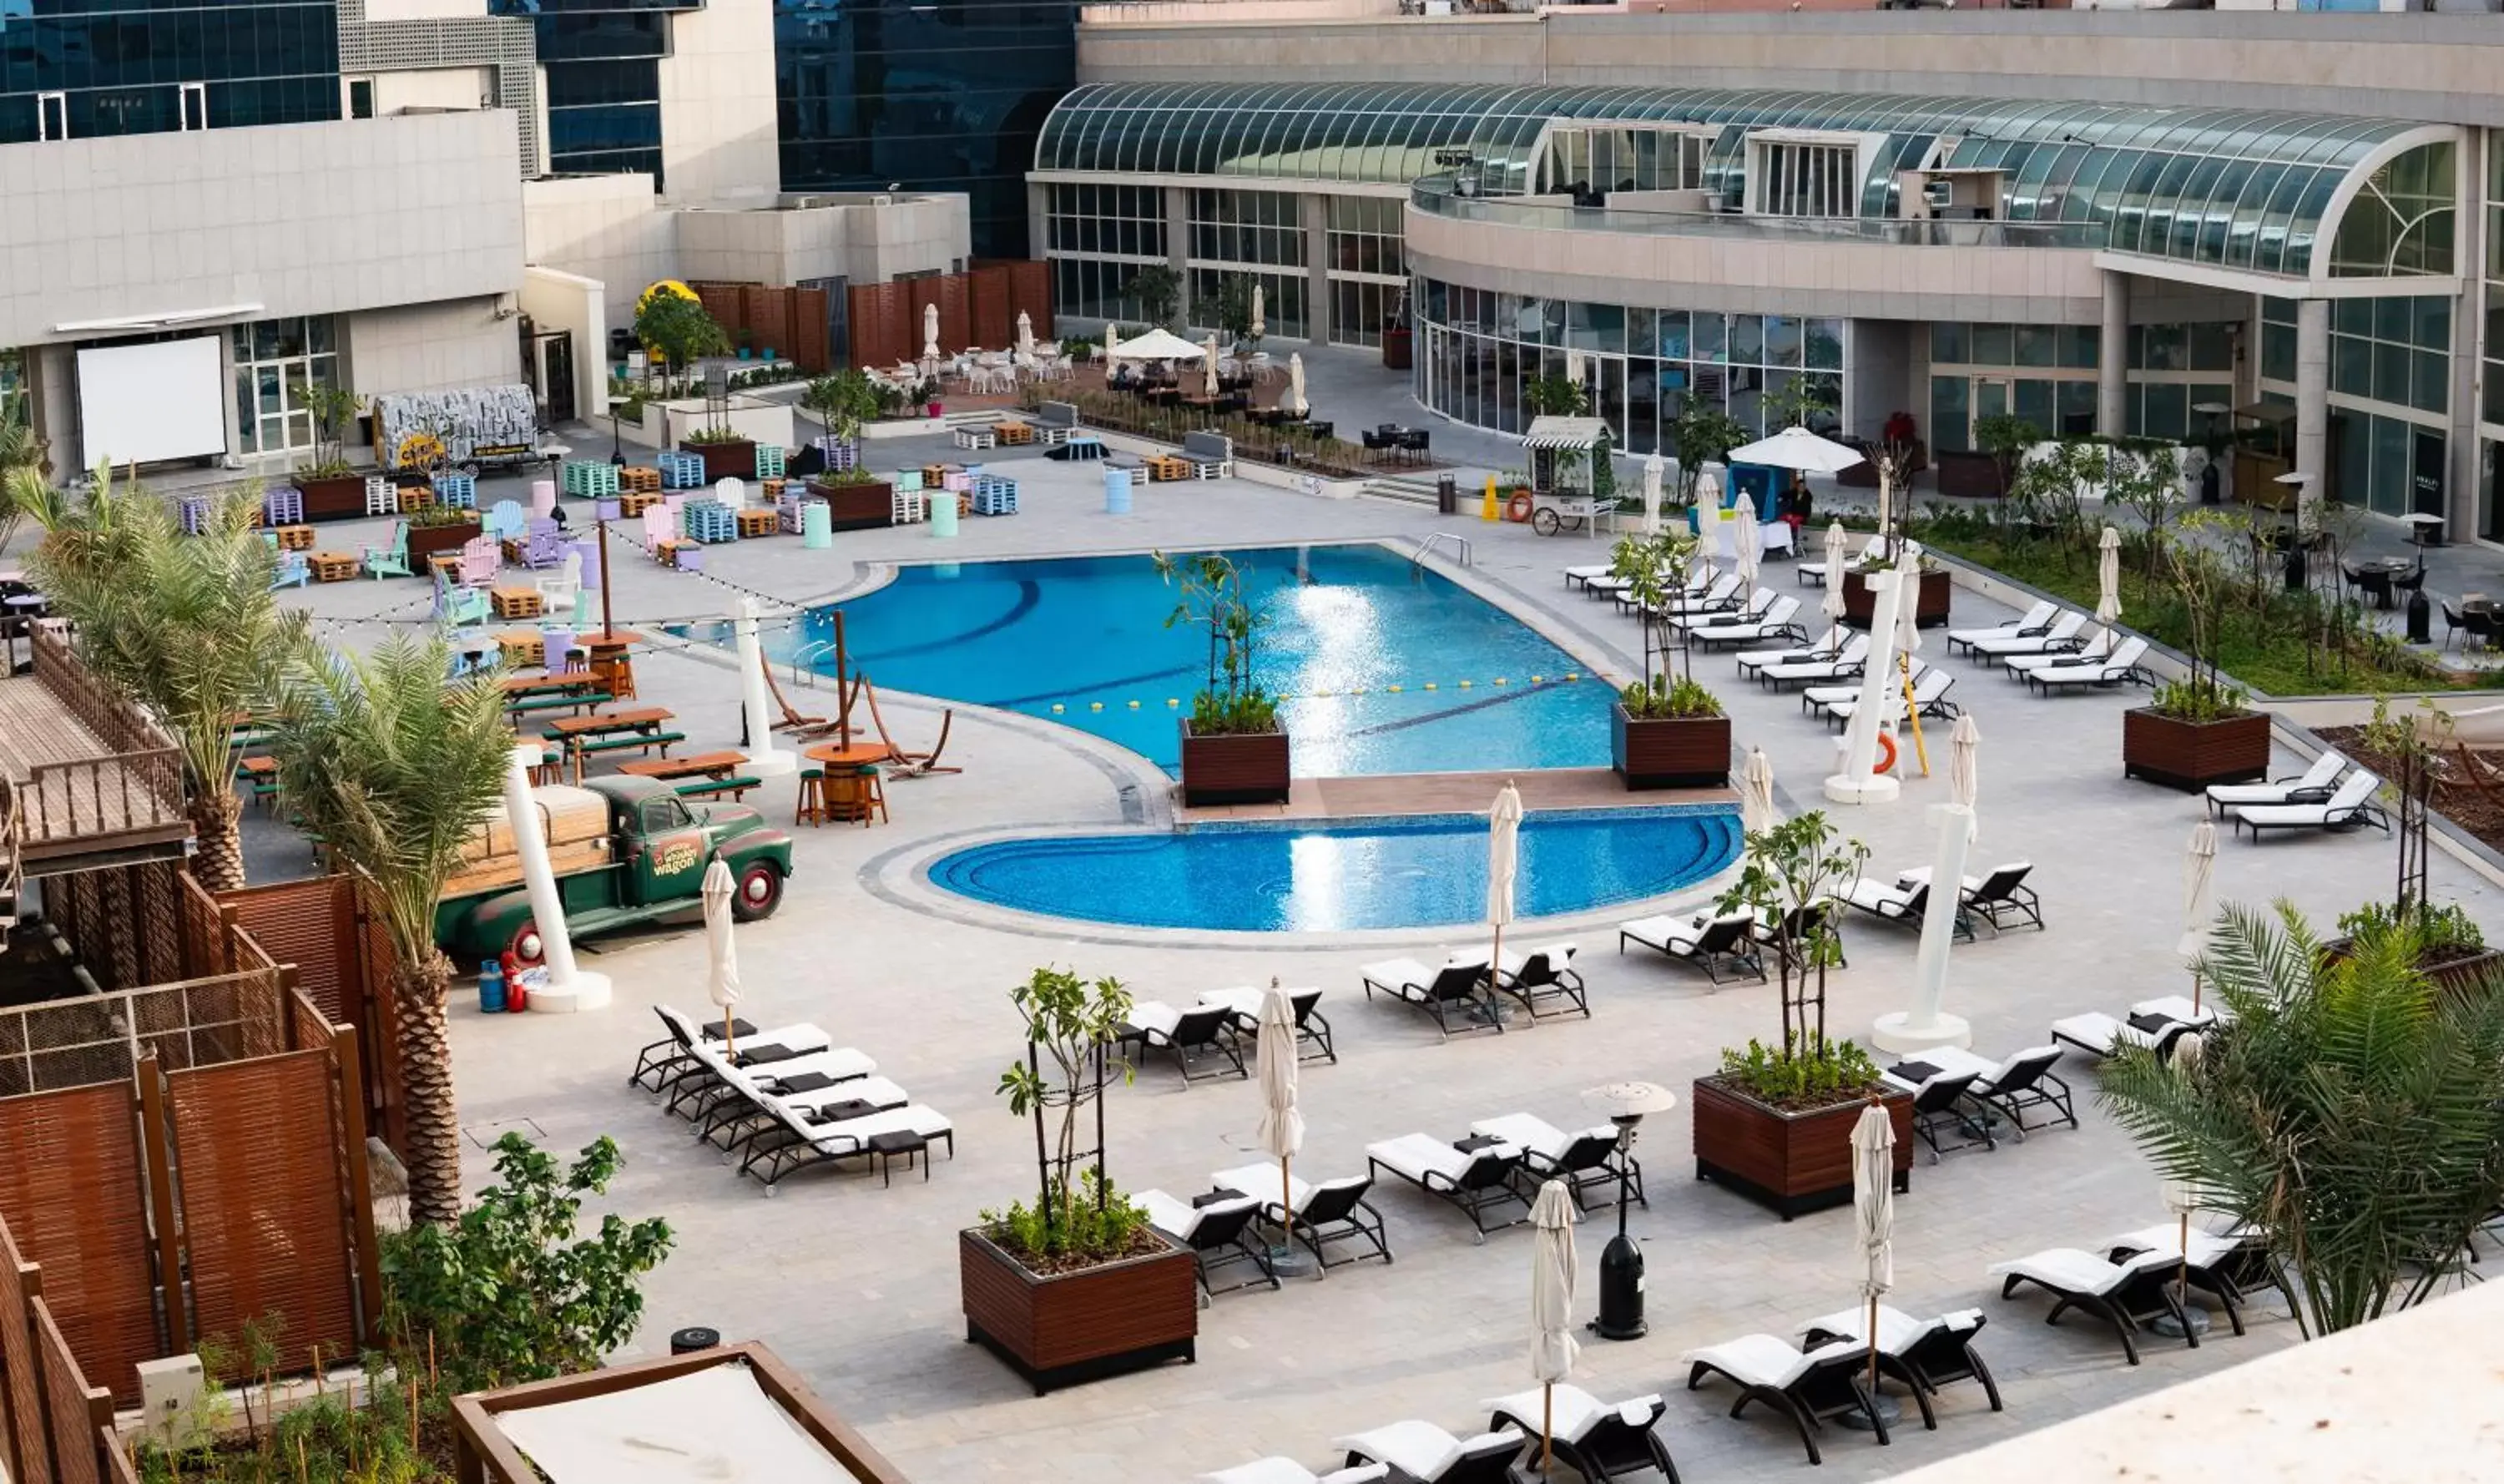 Property building, Pool View in Al Ain Palace Hotel Abu Dhabi